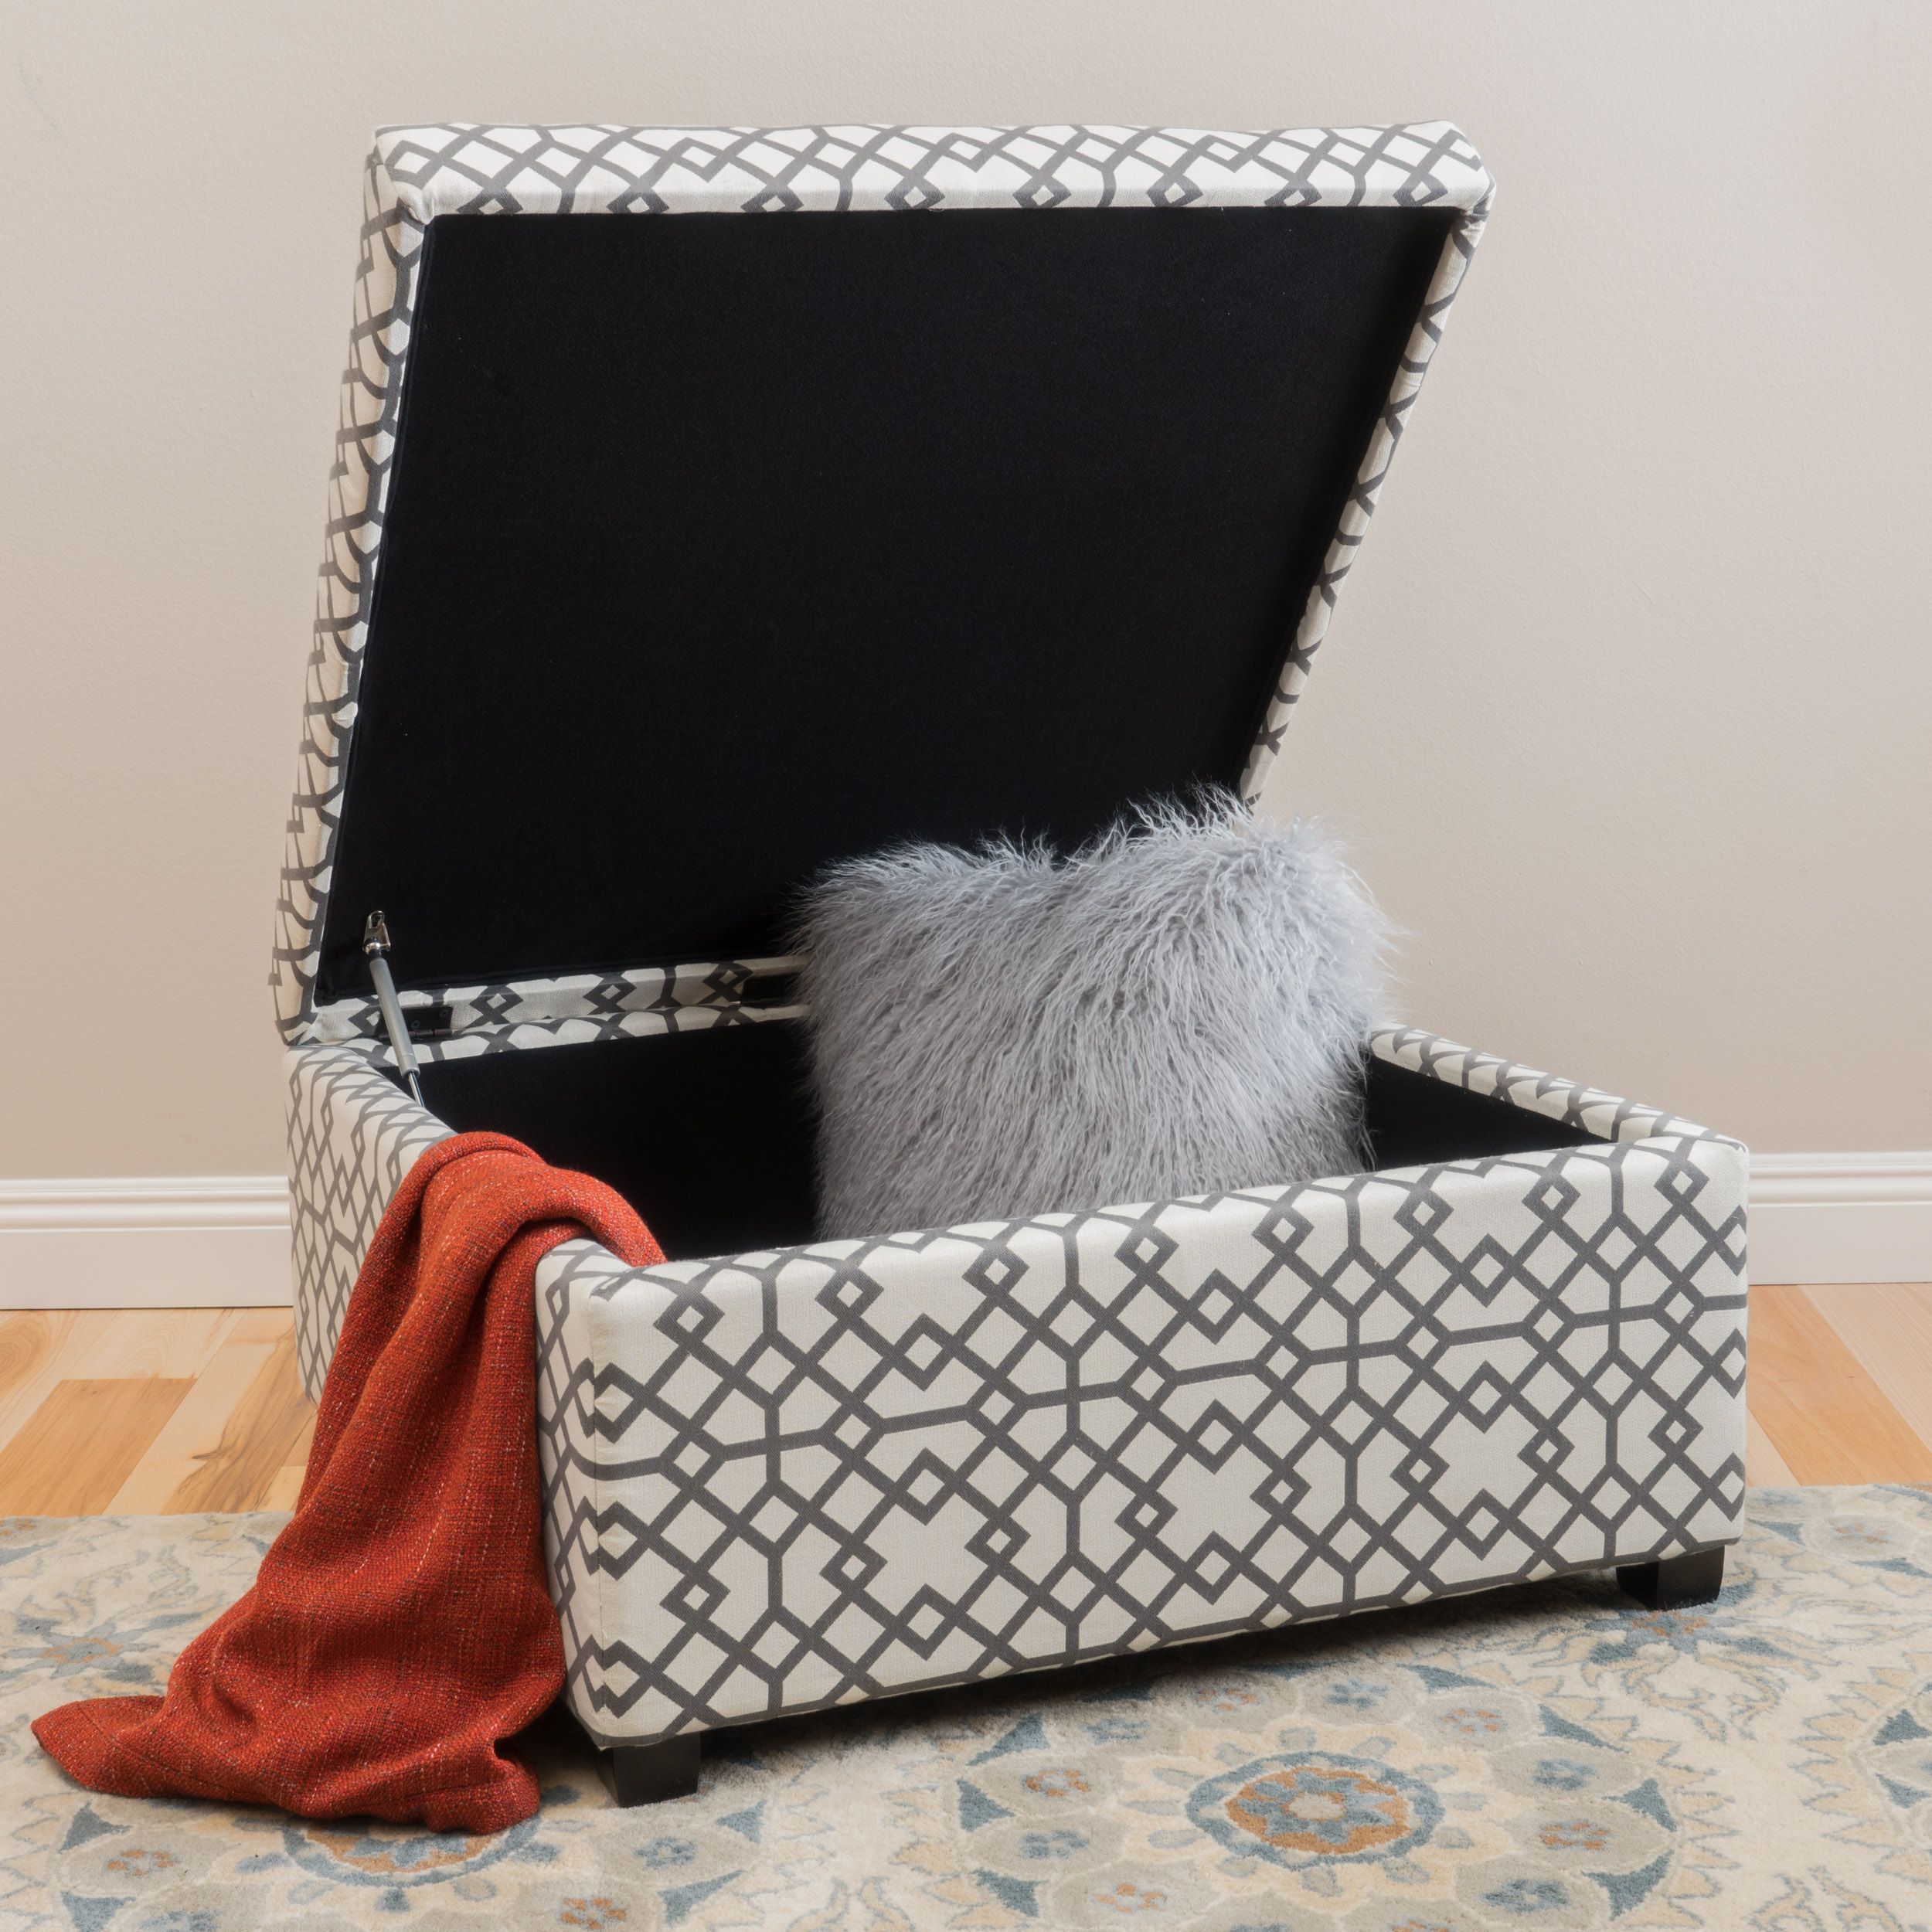 Noble House Bessley Patterned Fabric Storage Ottoman, Grey Geometric Throughout Brushed Geometric Pattern Ottomans (View 5 of 20)